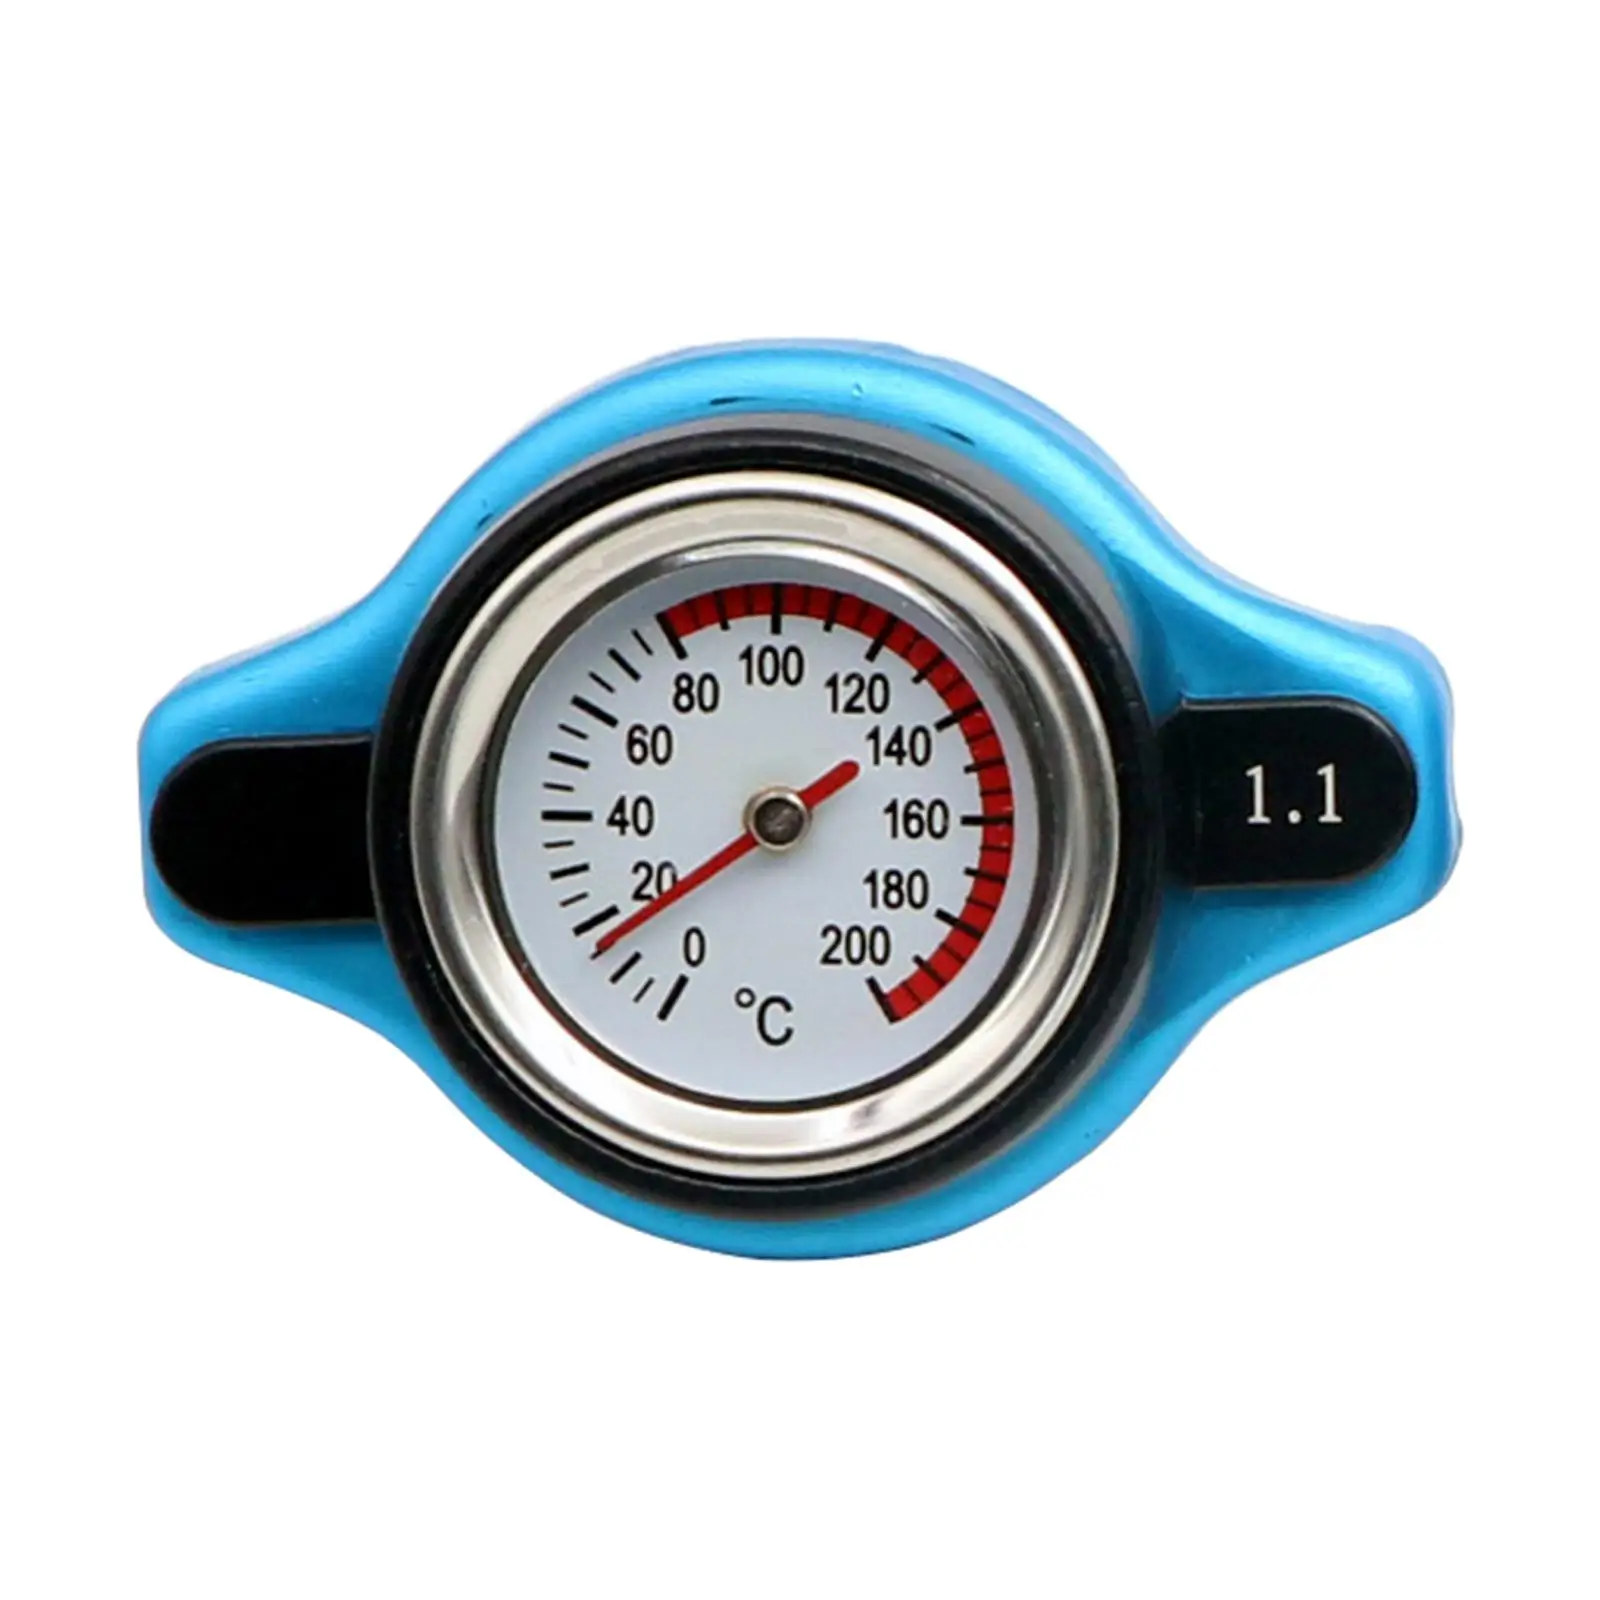 Thermostatic Radiator Cap Temp Gauge Easy Installation Sturdy Automotive Accessories High Quality Professional Replacement Parts